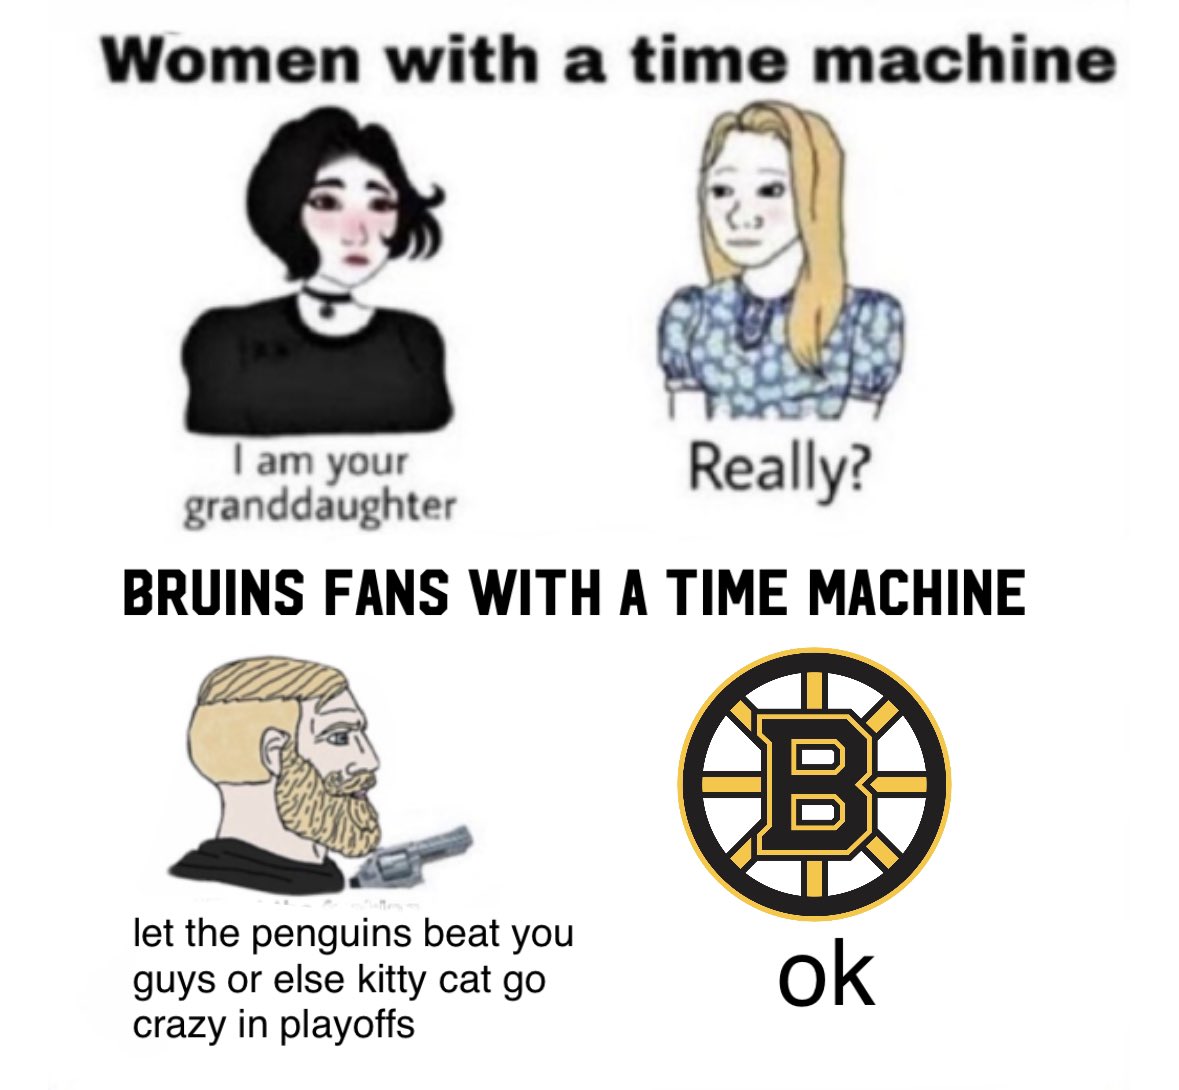 #NHLBruins #LetsGoPens we could have both potentially been happy